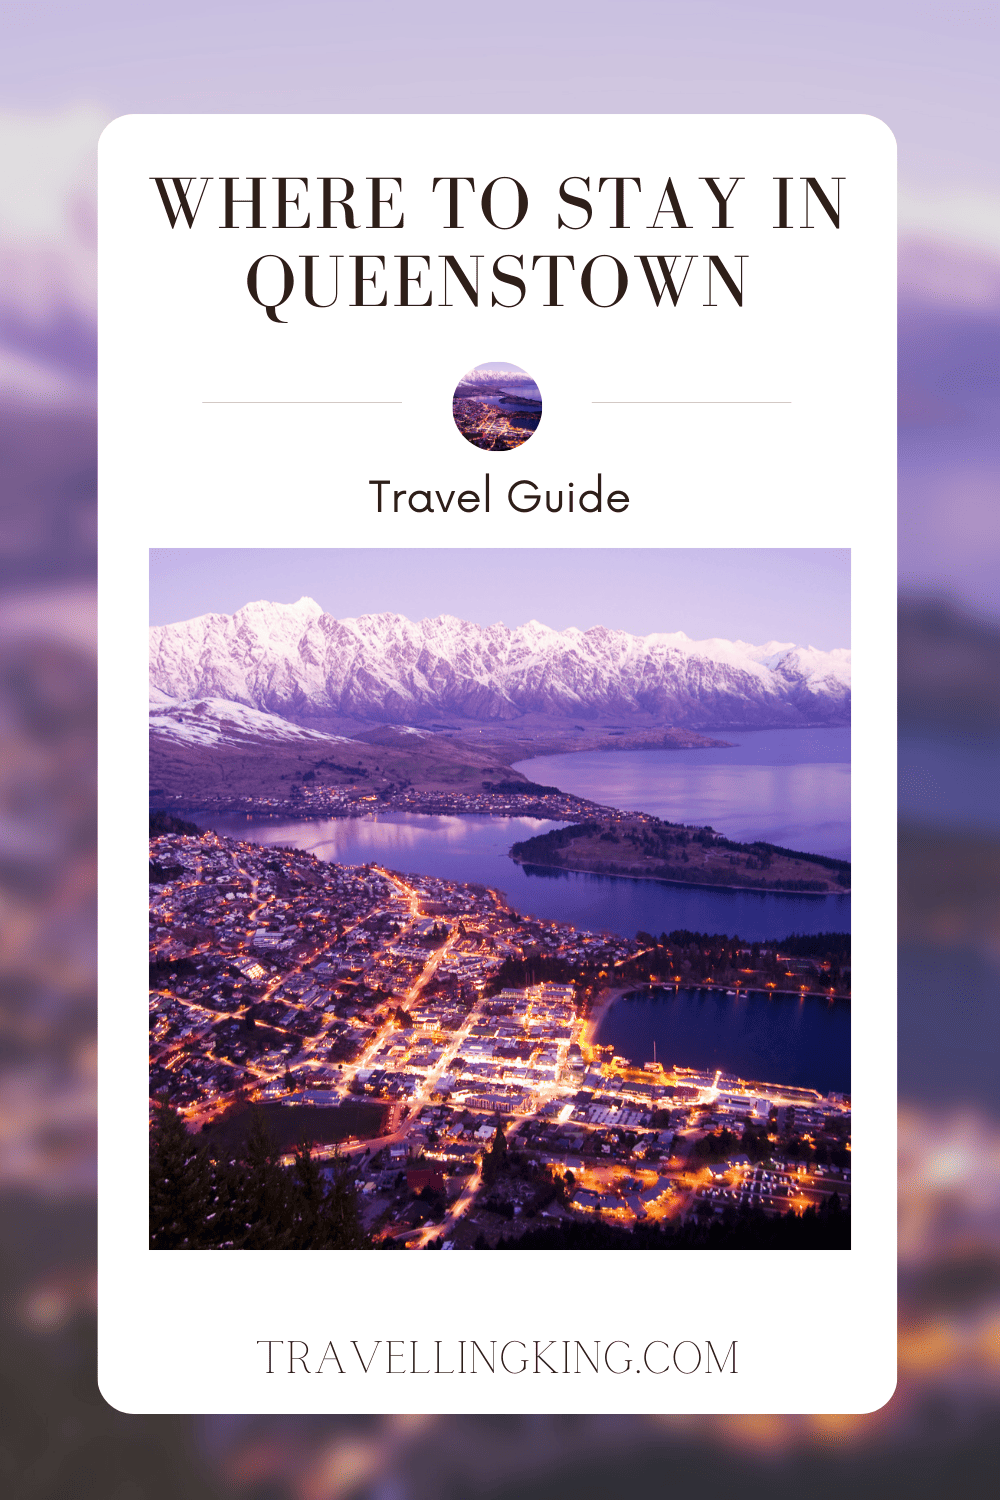 Where to stay in Queenstown